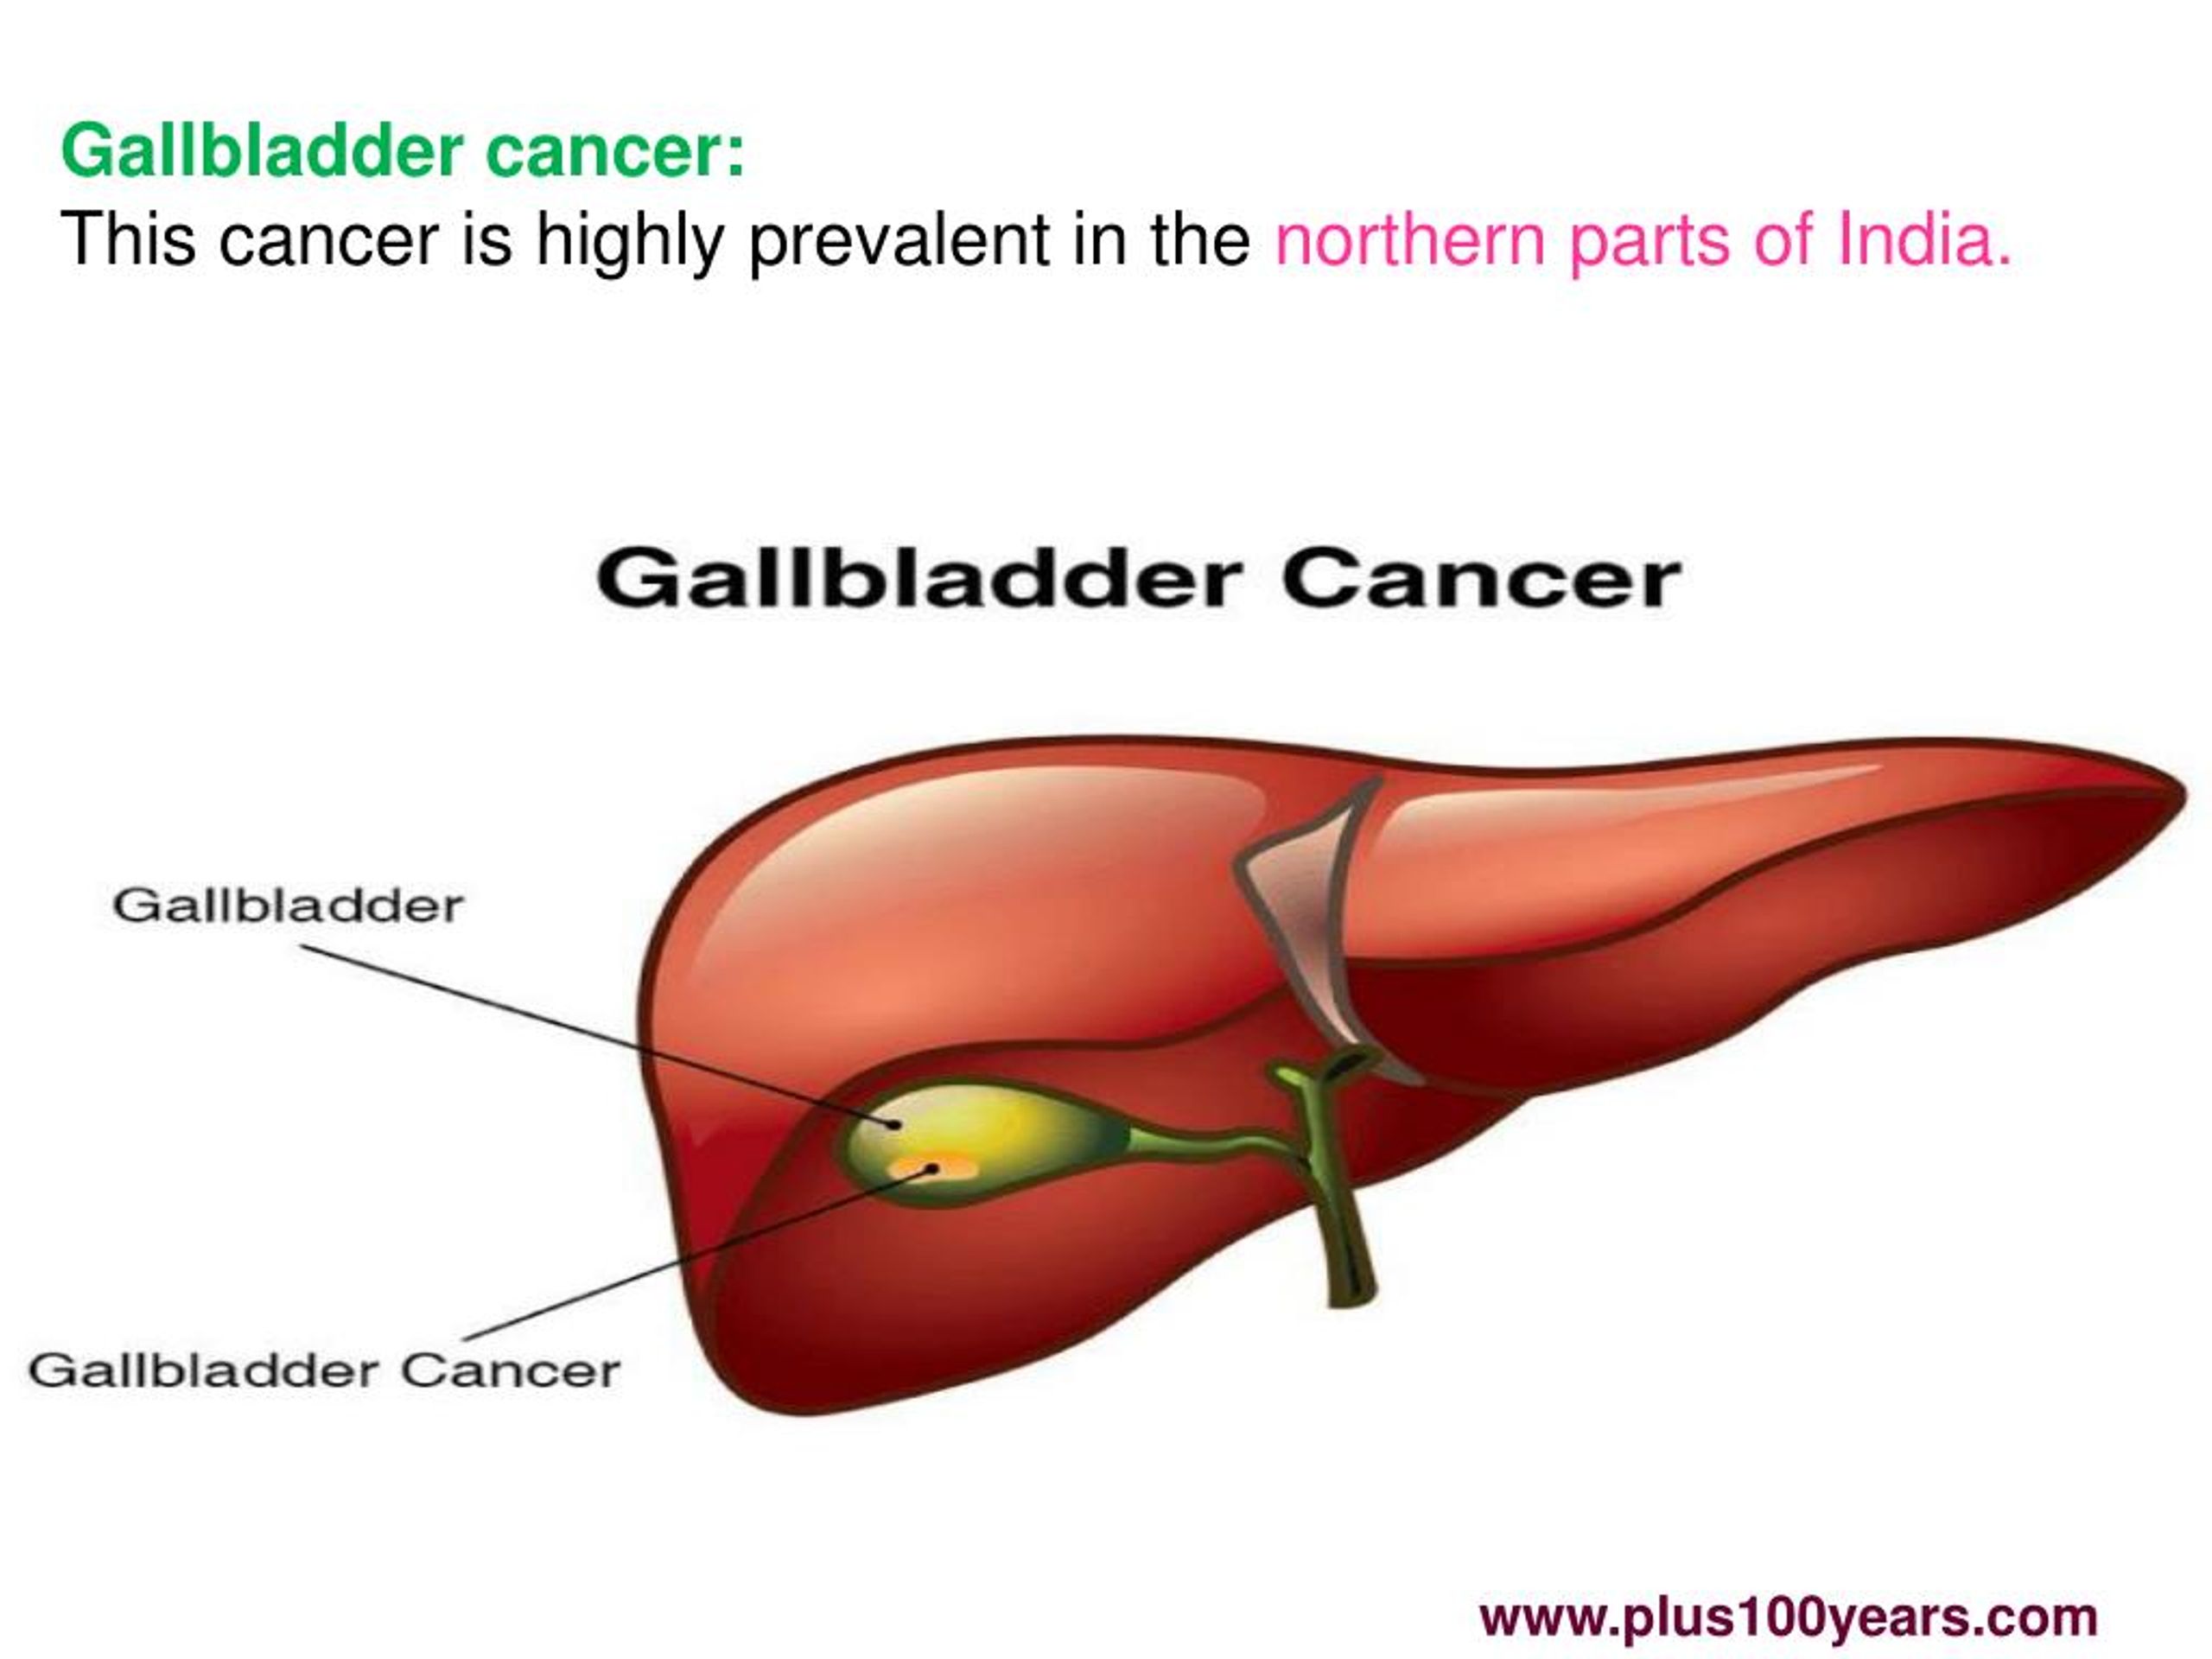 PPT - Why is Cancer on the rise in India? Know Cancer statistics in ...